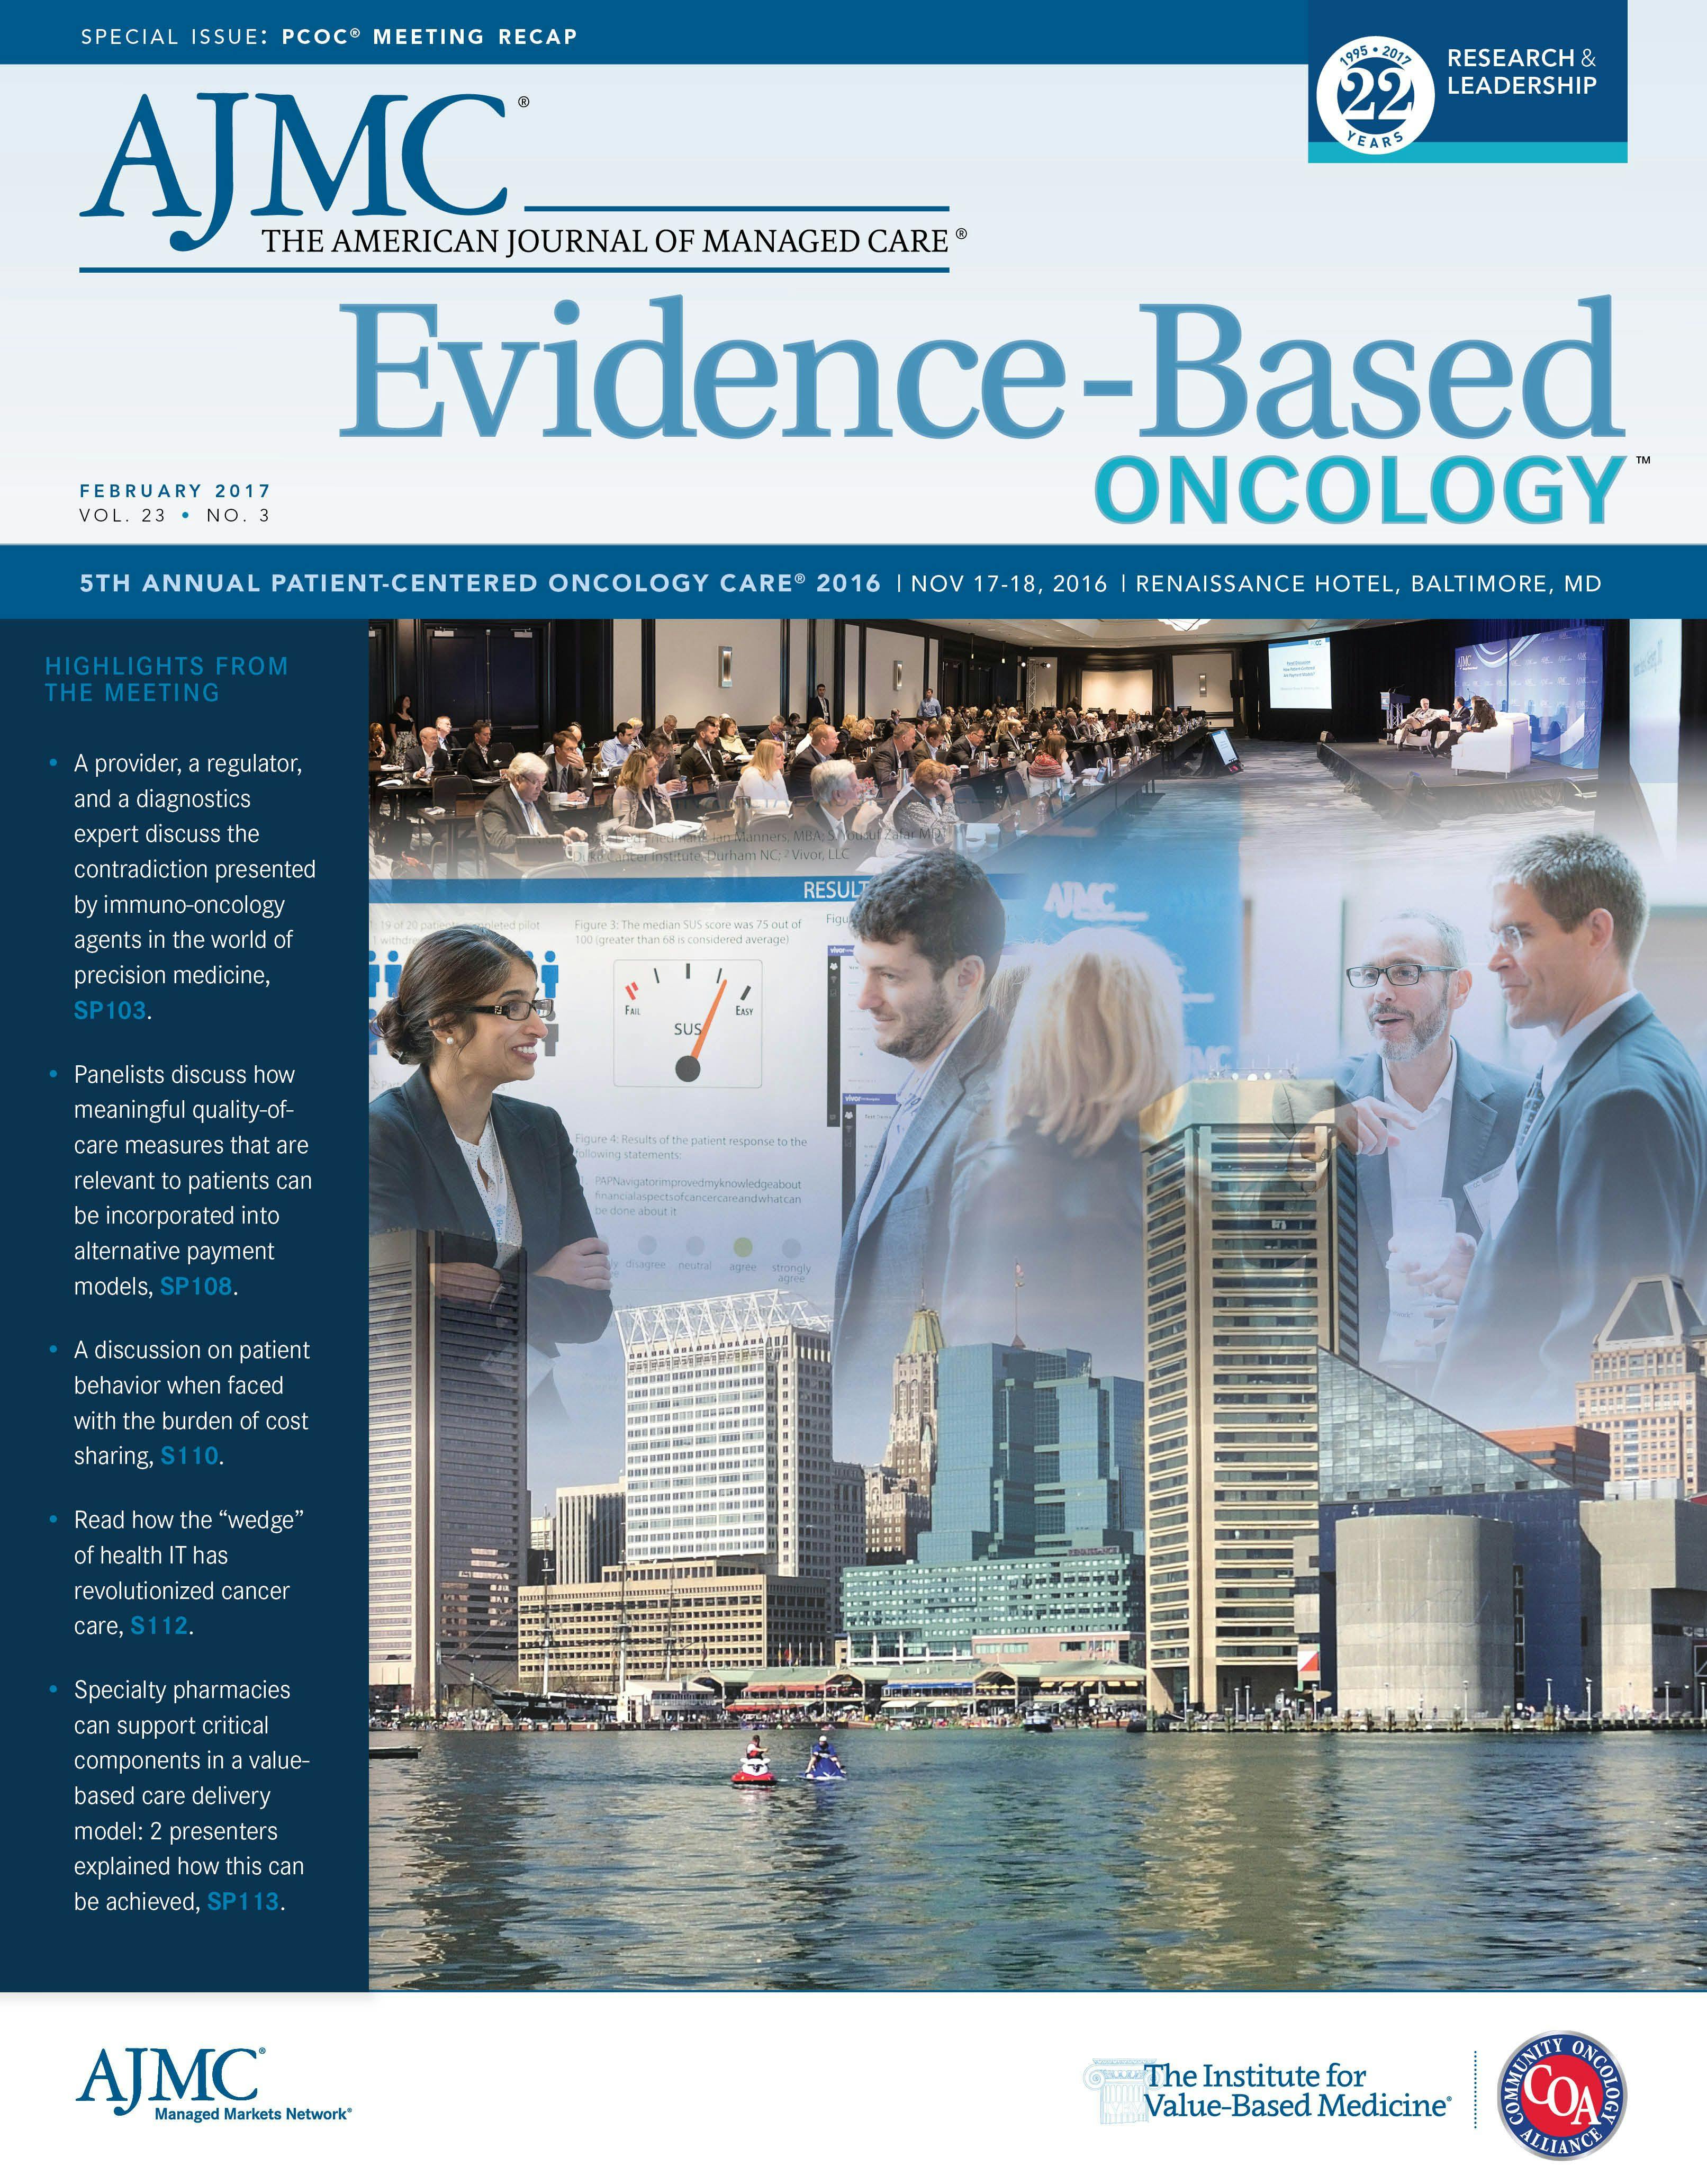 Patient-Centered Oncology Care 2016